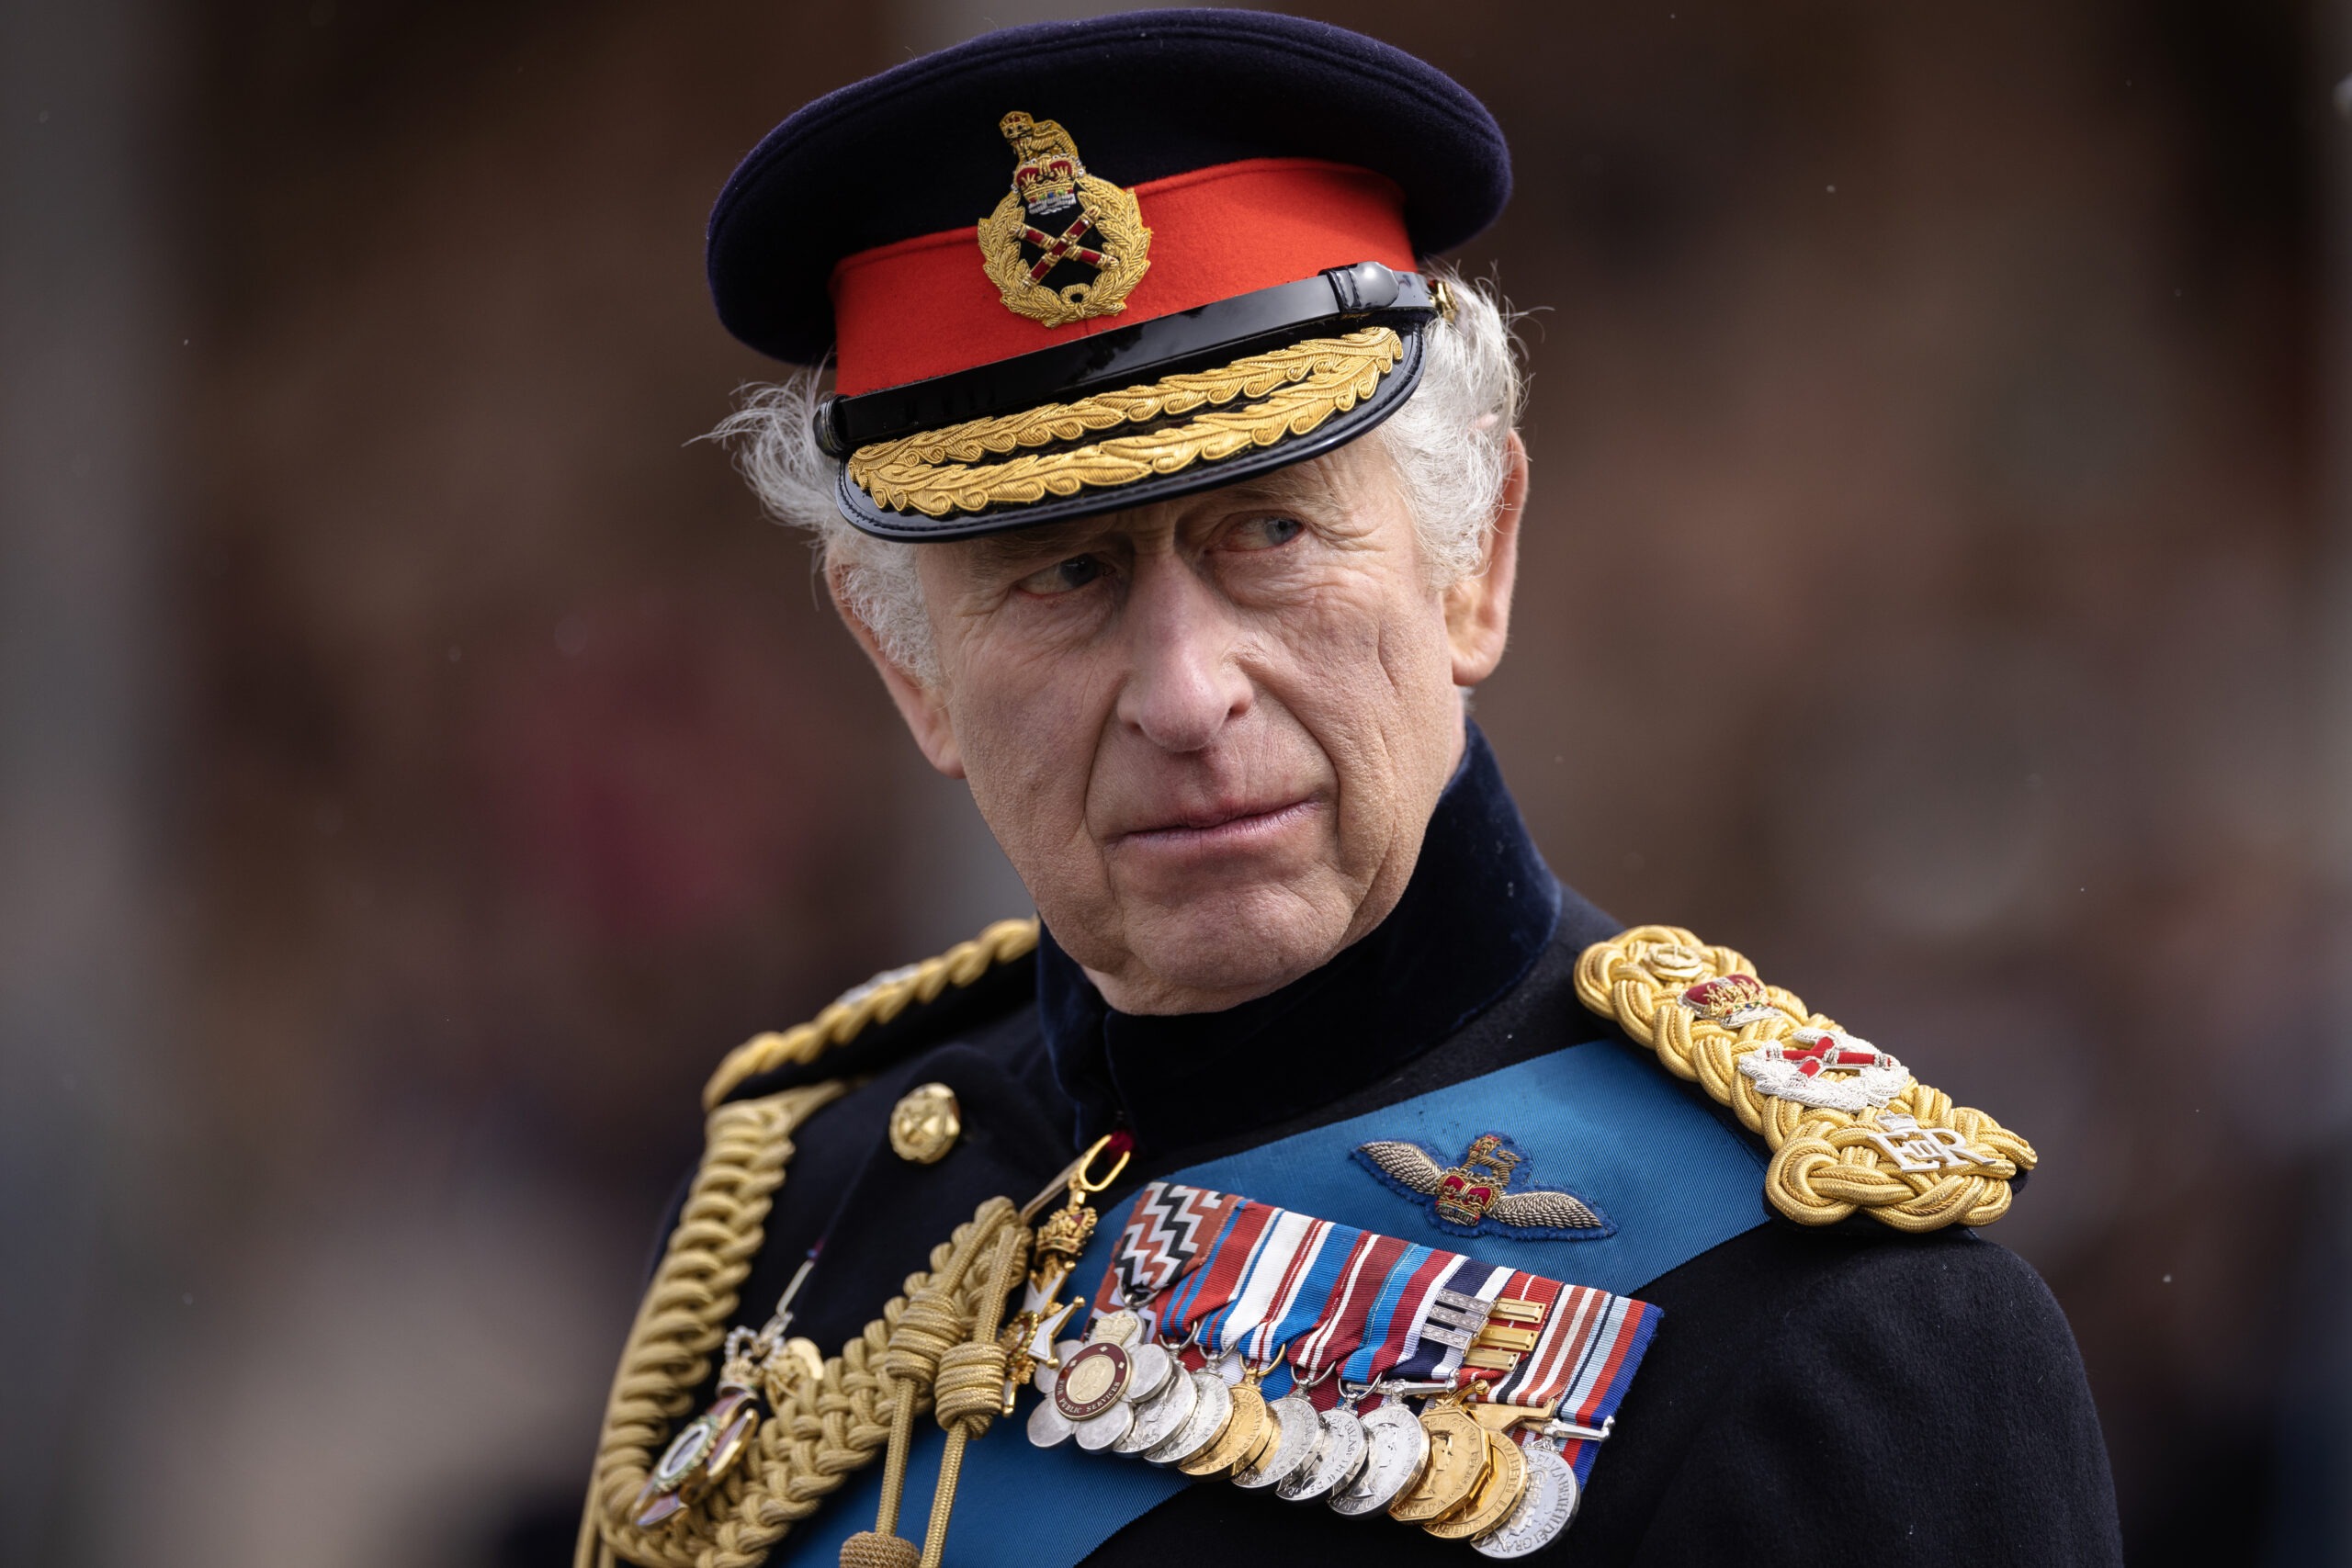 King Charles III inspects the 200th Sovereign's parade at Royal Military Academy Sandhurst on April 14, 2023 in Camberley, England Source: Getty Images